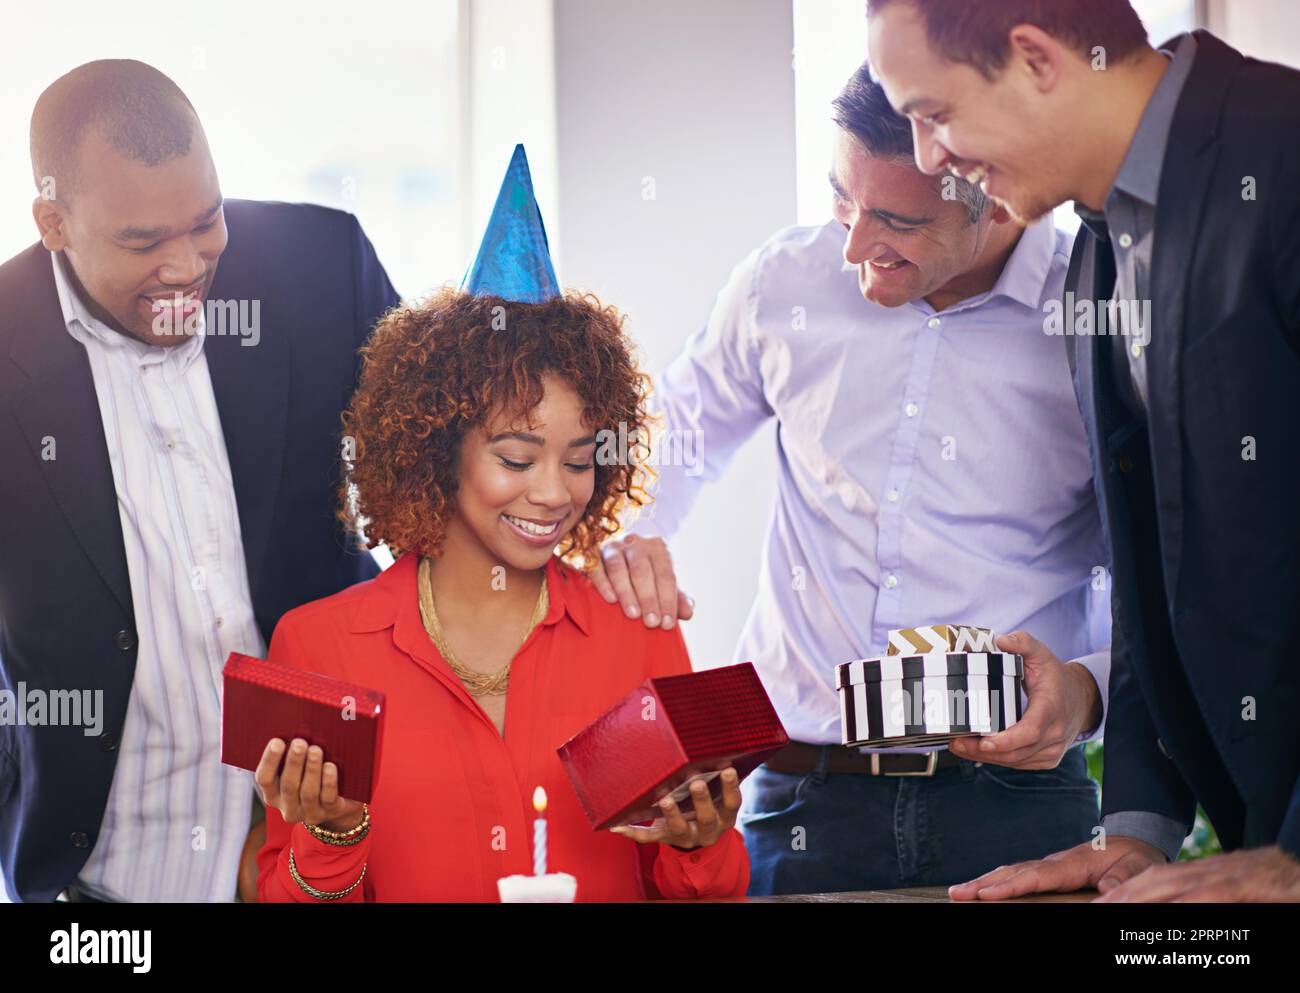 You shouldnt have...a group of coworkers celebrating a birthday. Stock Photo